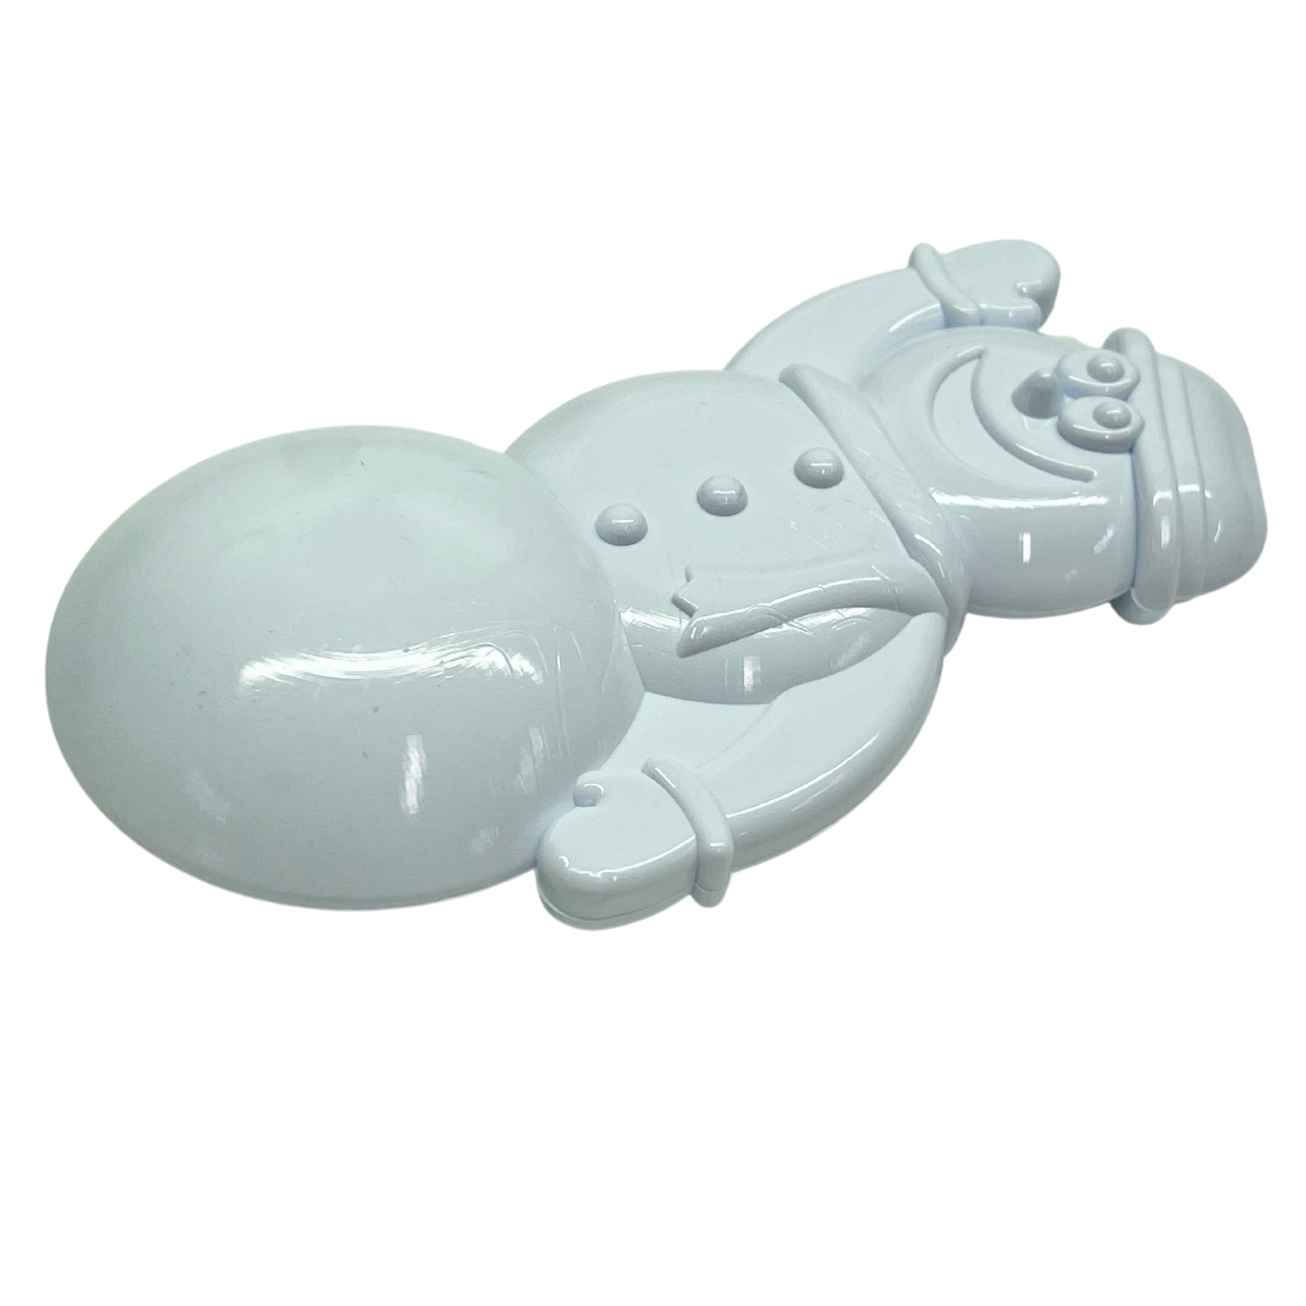 Nylon Snowman Dog Chew Toy from Sodapup Dog Toys and Rover Pet Products. For extreme chewers only.